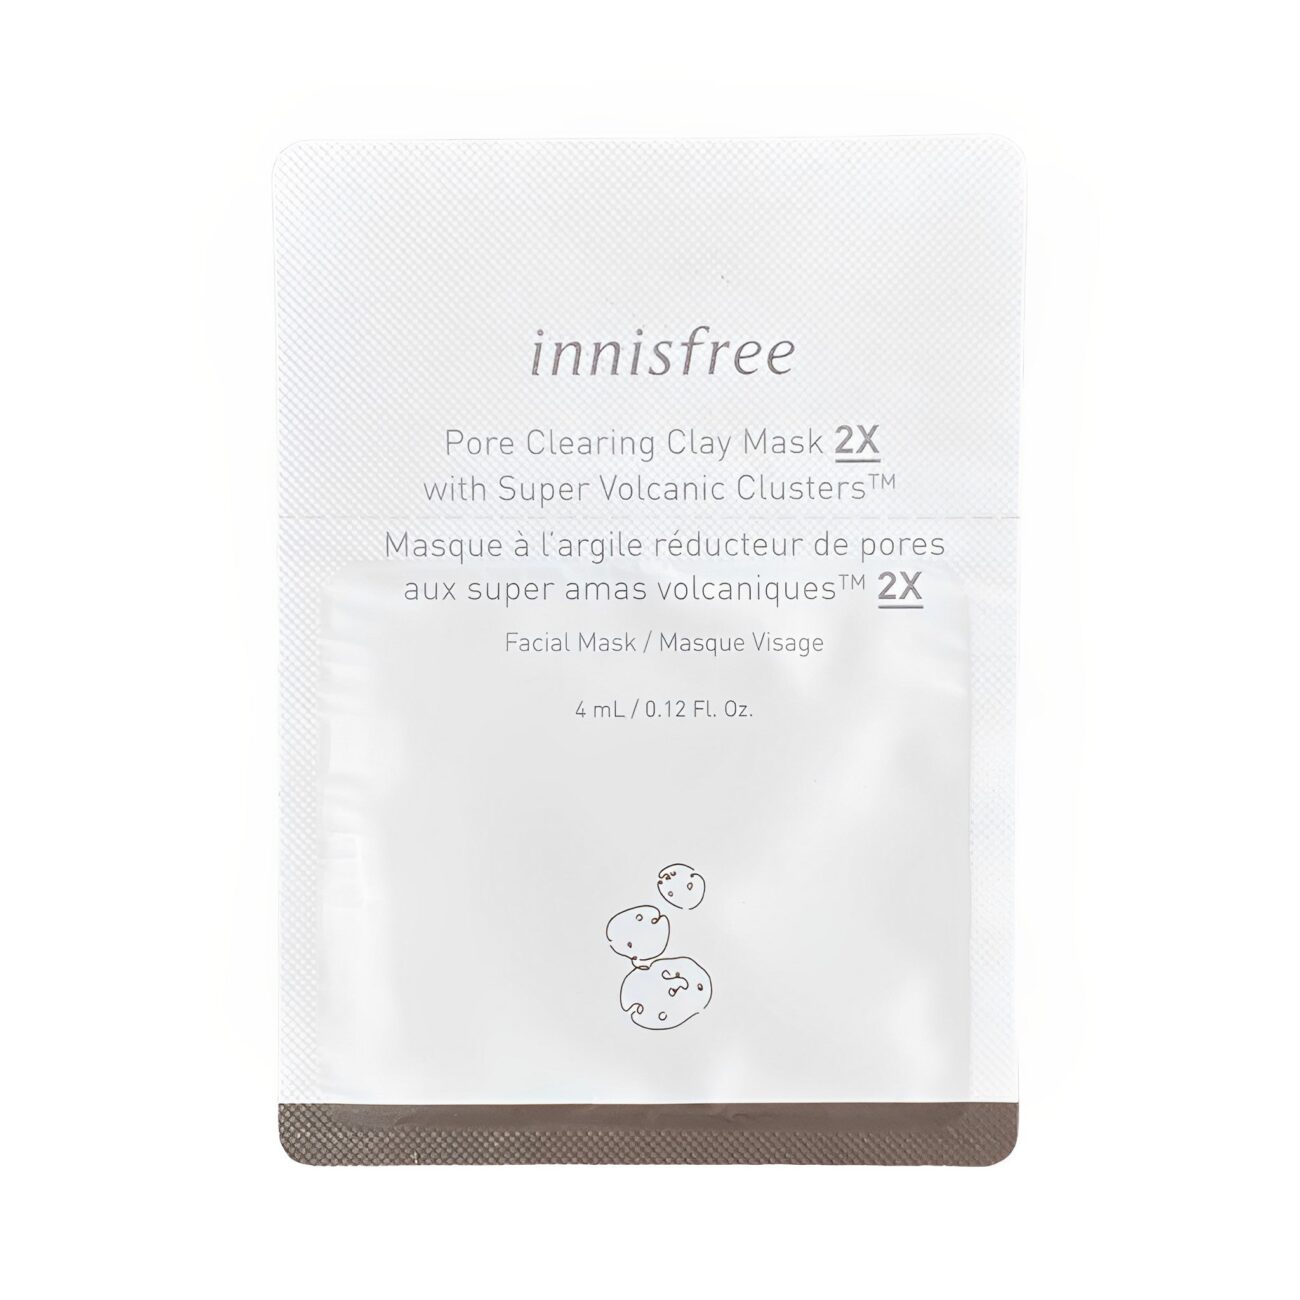 Pore Clearing Clay Mask 2X Sample-Innisfree